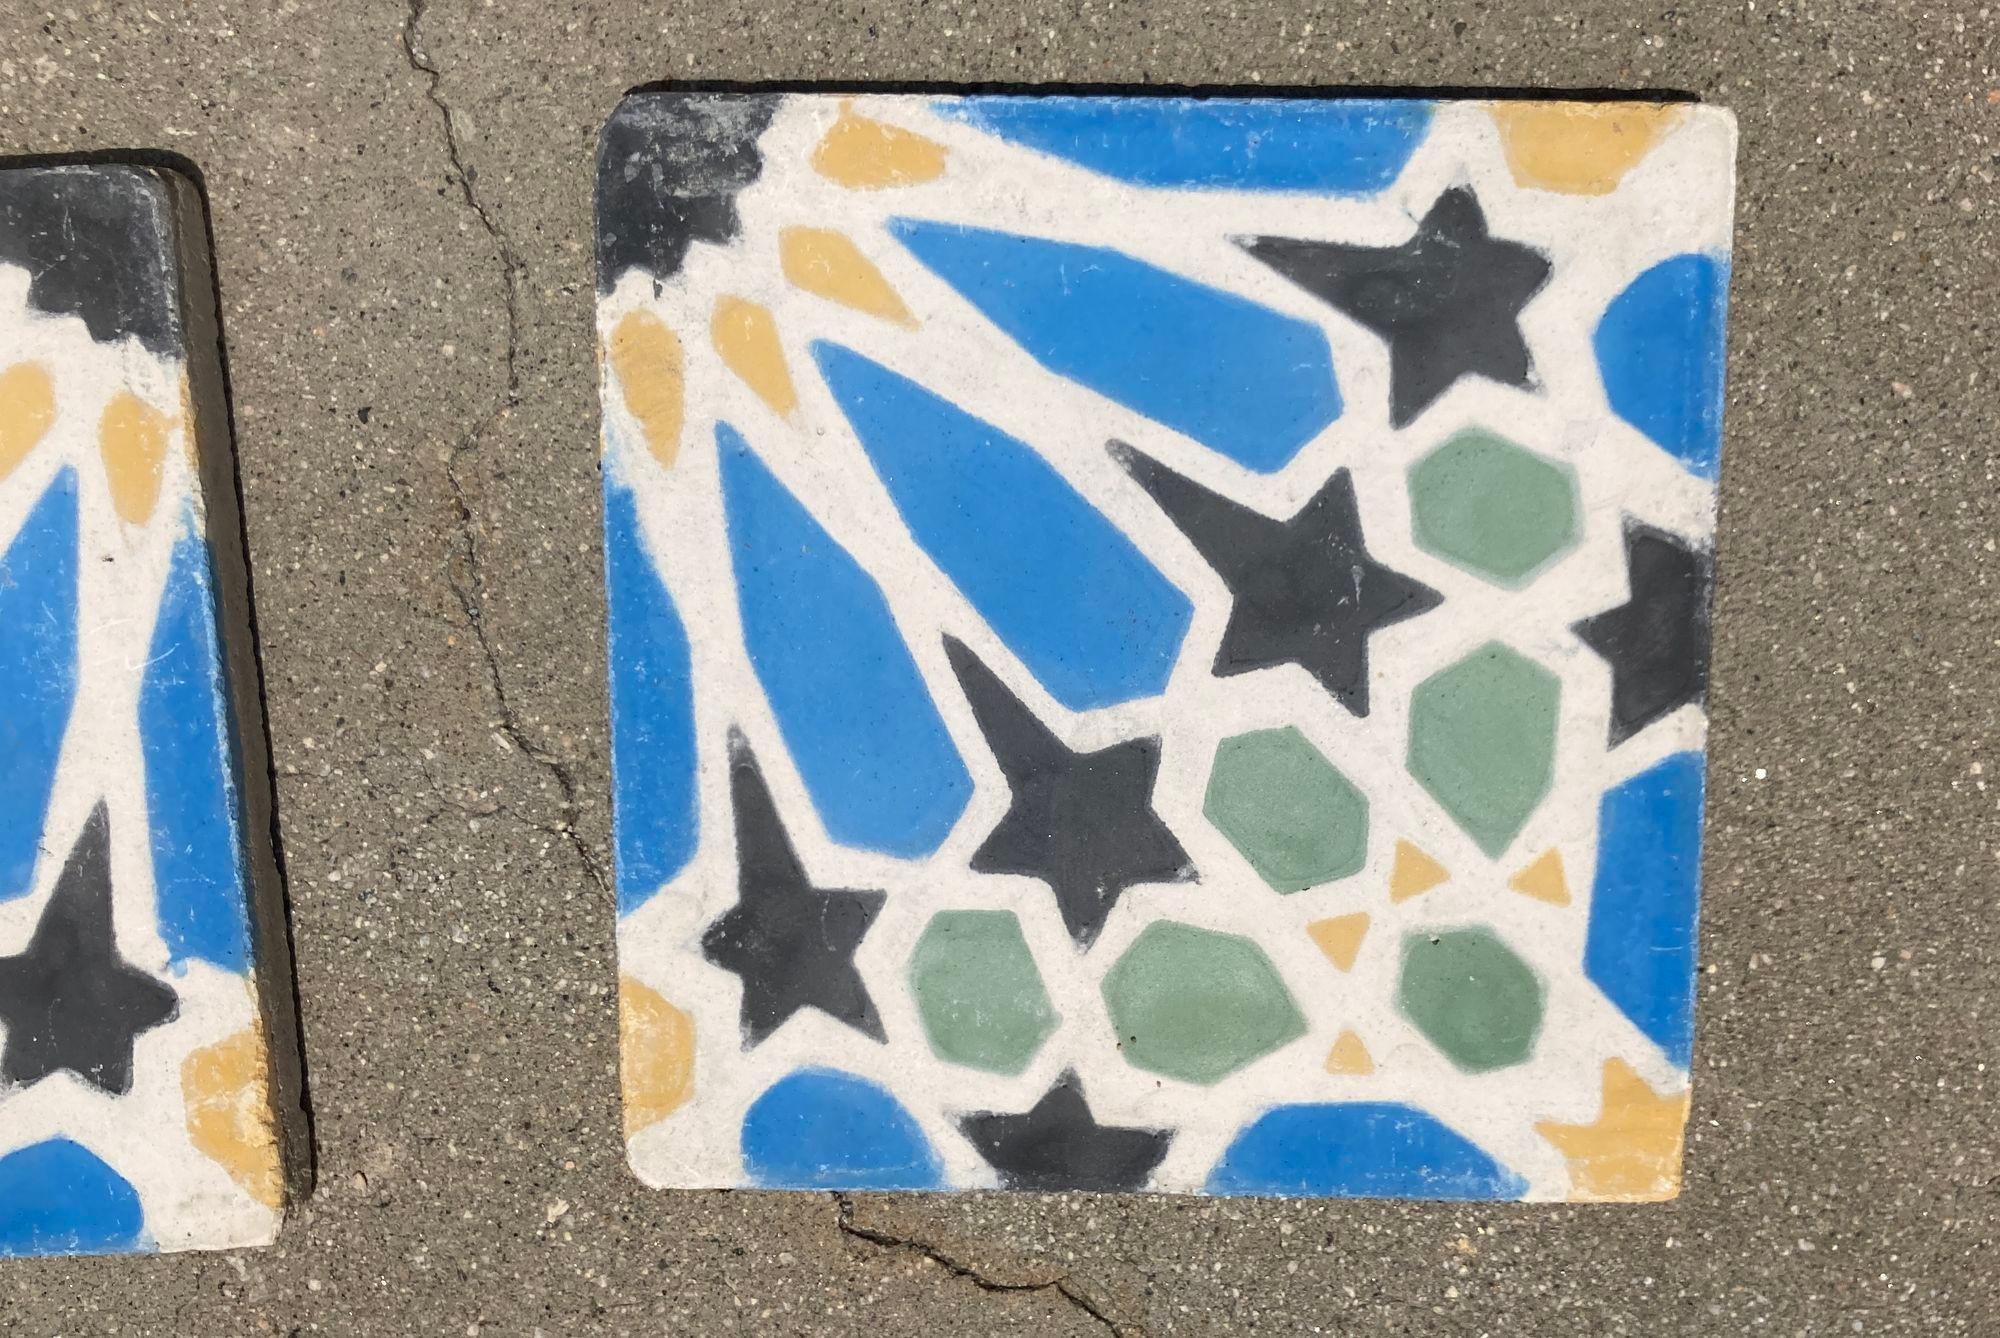 Moroccan Reclaimed Encaustic Cement Tile with Moorish Fez Design.
Moroccan handcrafted and hand-painted cement tiles with traditional Moorish colors.
These are authentic Moroccan reclaimed encaustic tiles hand made by artisans in Fez